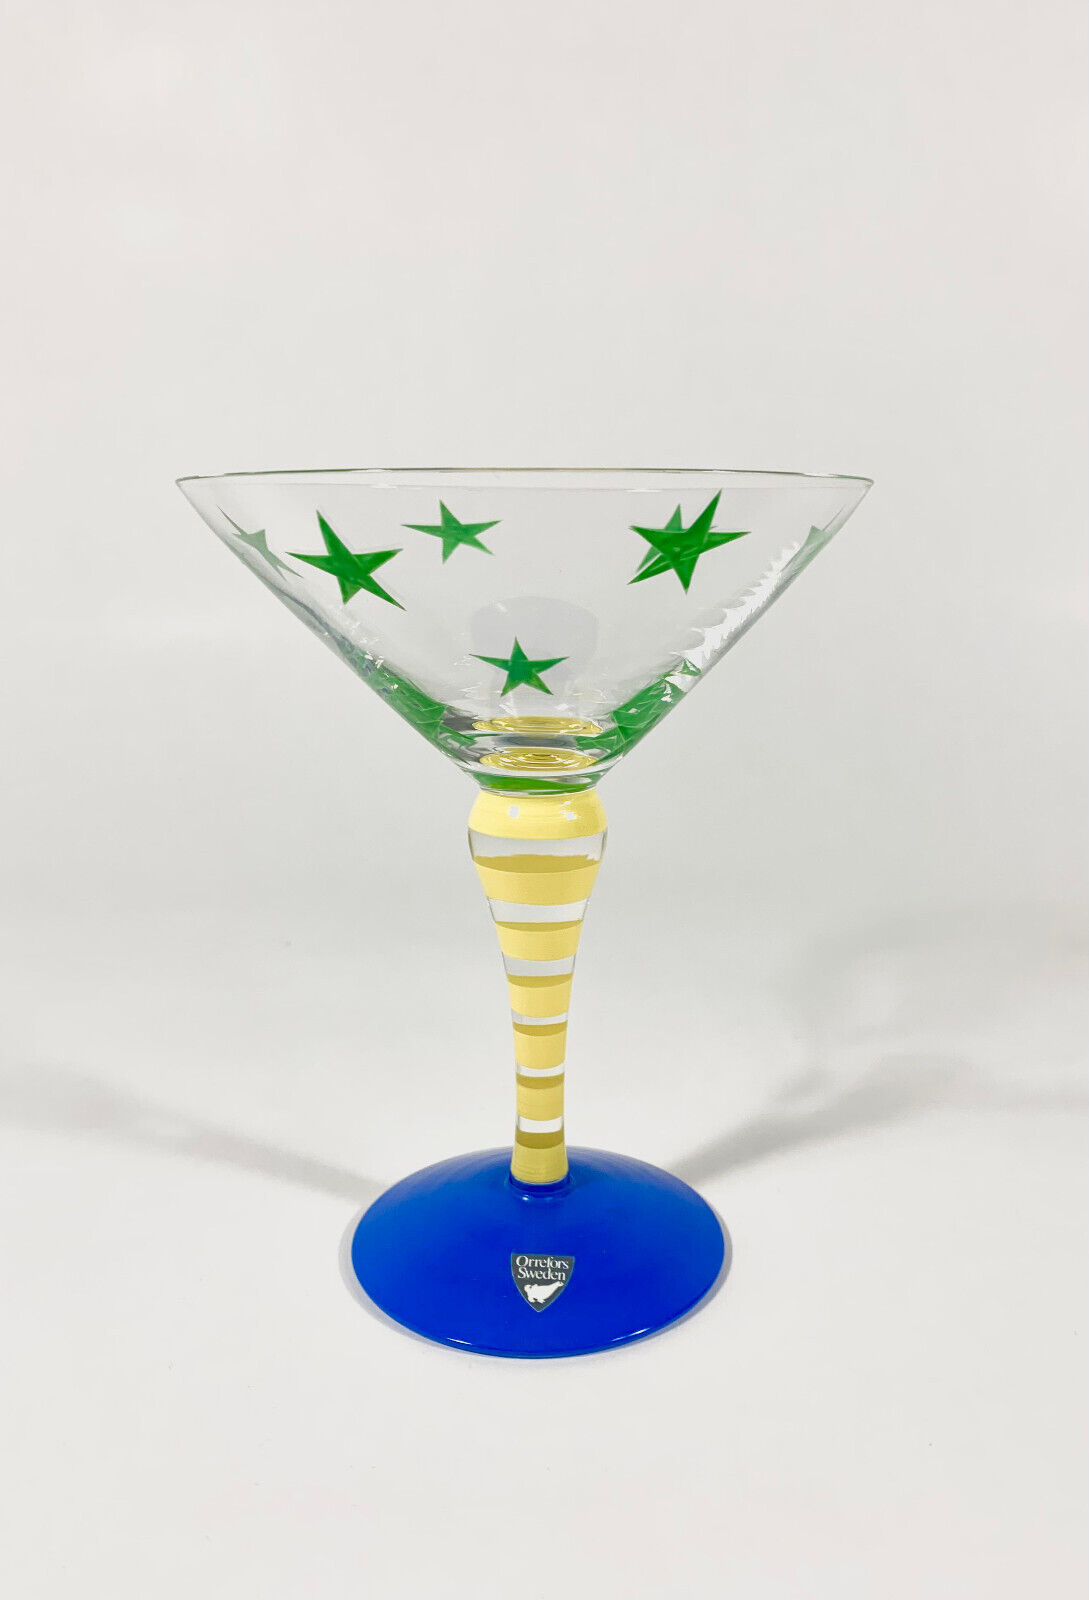 Orrefors Anne Nilsson Clown Crystal Green Starred Yellow Striped Martini Glass